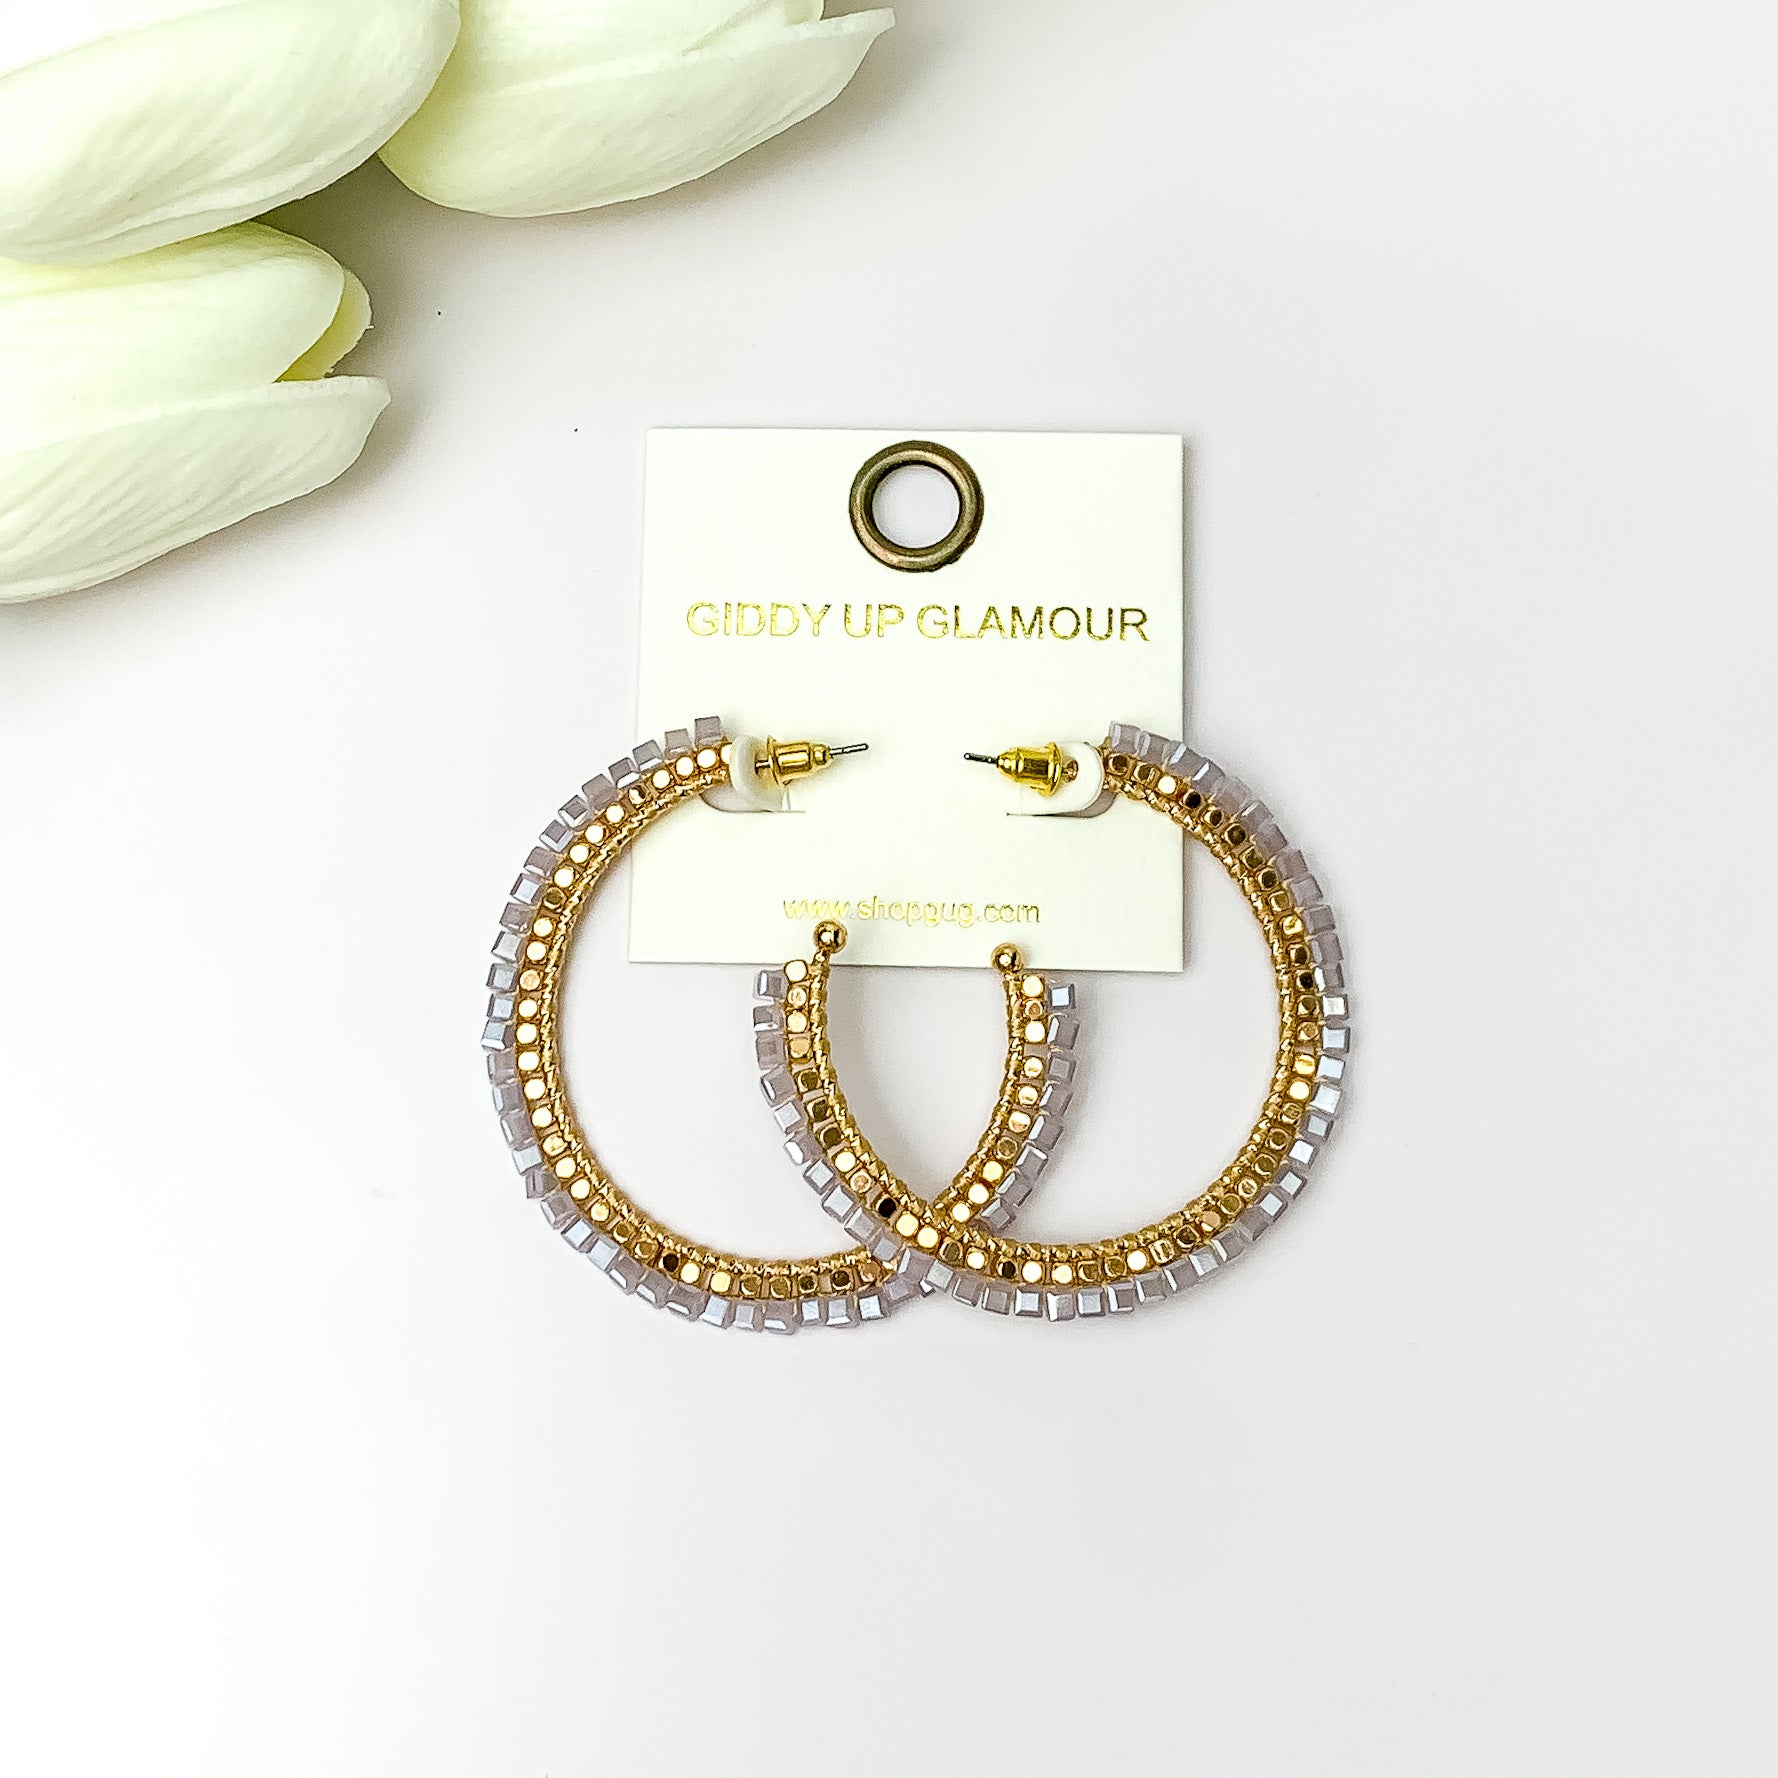 Pictured are circle gold toned hoop earrings with gold beads around it and pale lavender crystal outline. They are pictured with white flowers on a white background.